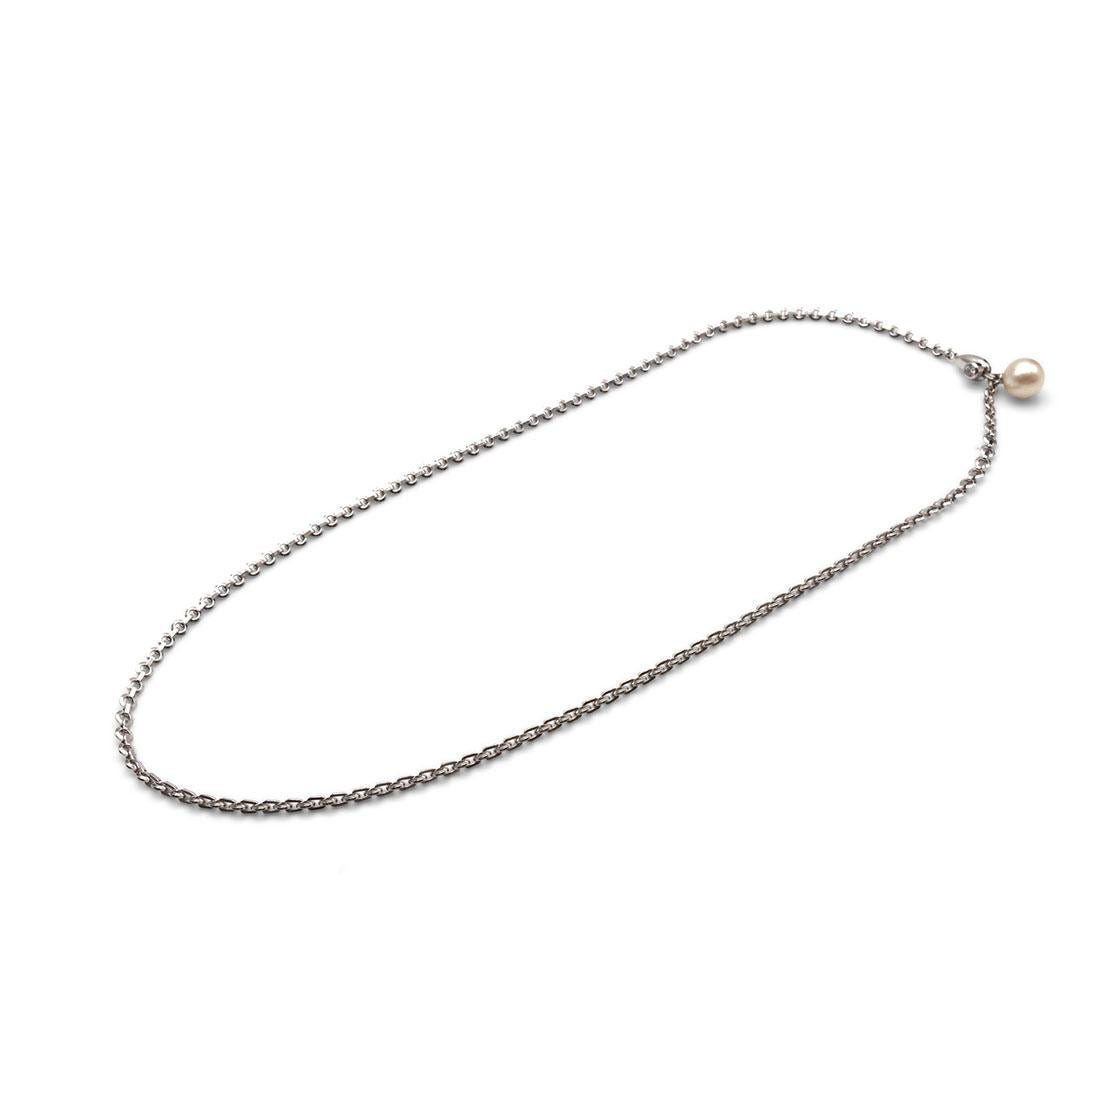 Authentic Cartier necklace crafted in 18 karat white gold is comprised of circle links. The necklace closure features a pearl and a single round brilliant cut diamond with an estimated carat weight of 0.15. The round pearl has a a white body color